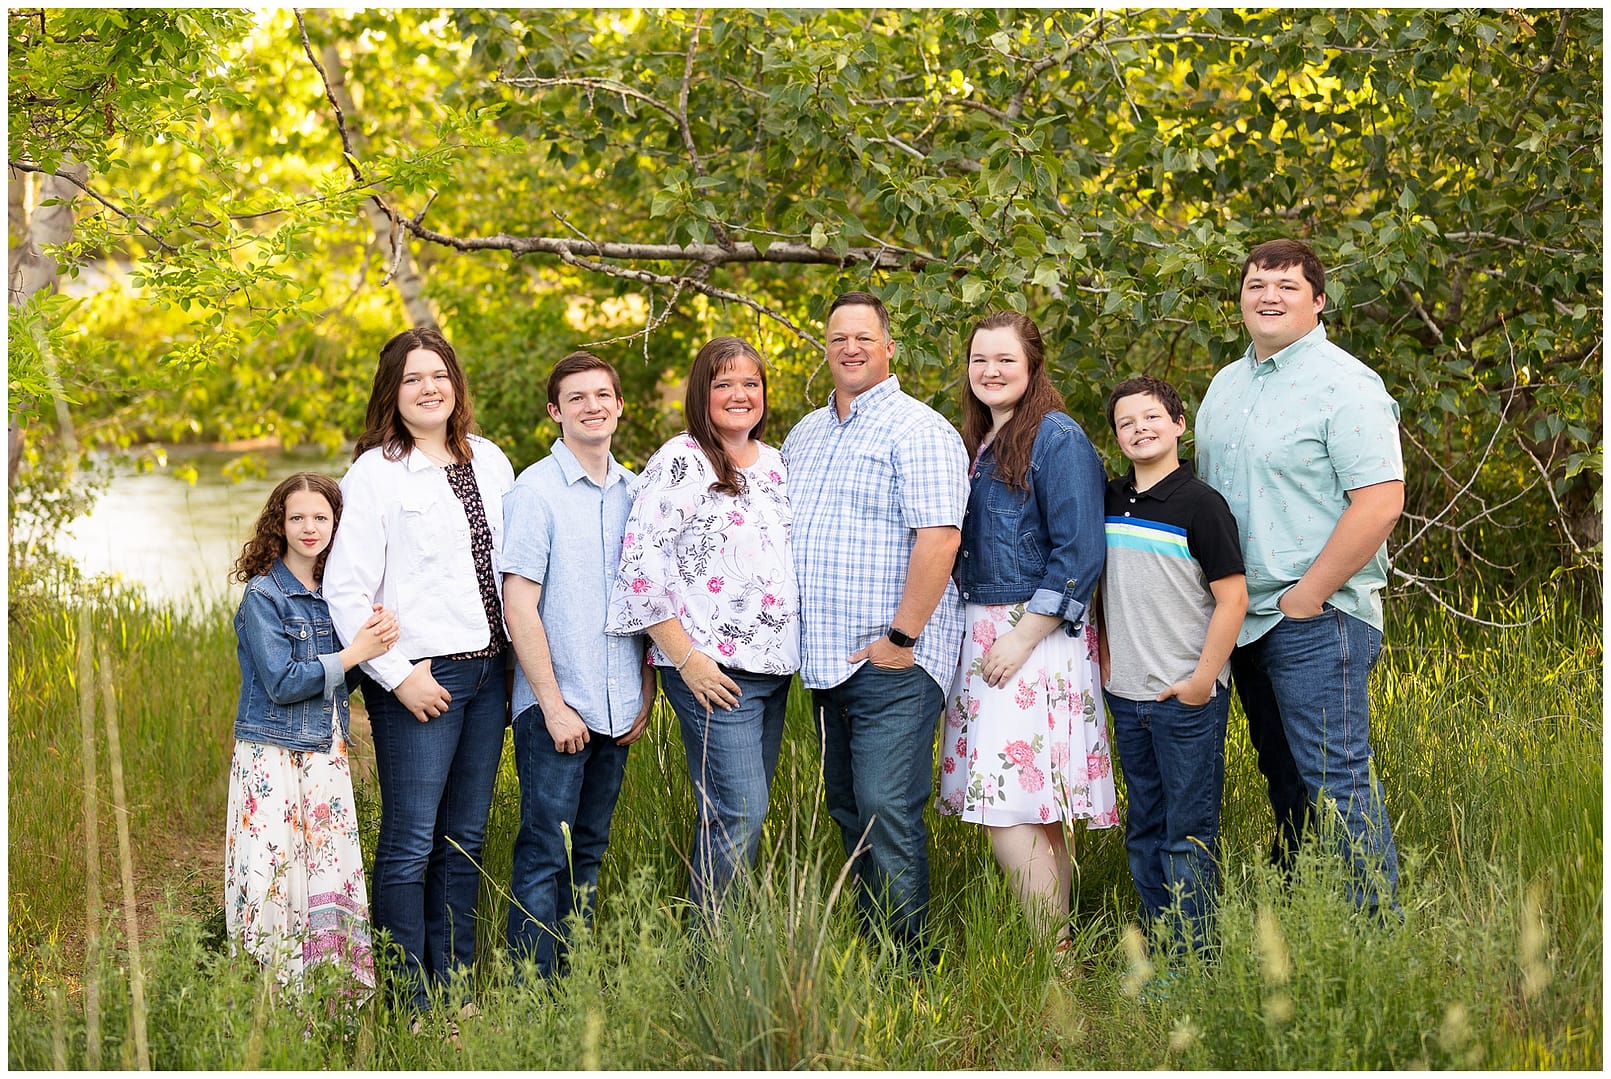 Large family portrait on the bank of the Boise River. Photo by Tiffany Hix Photography.